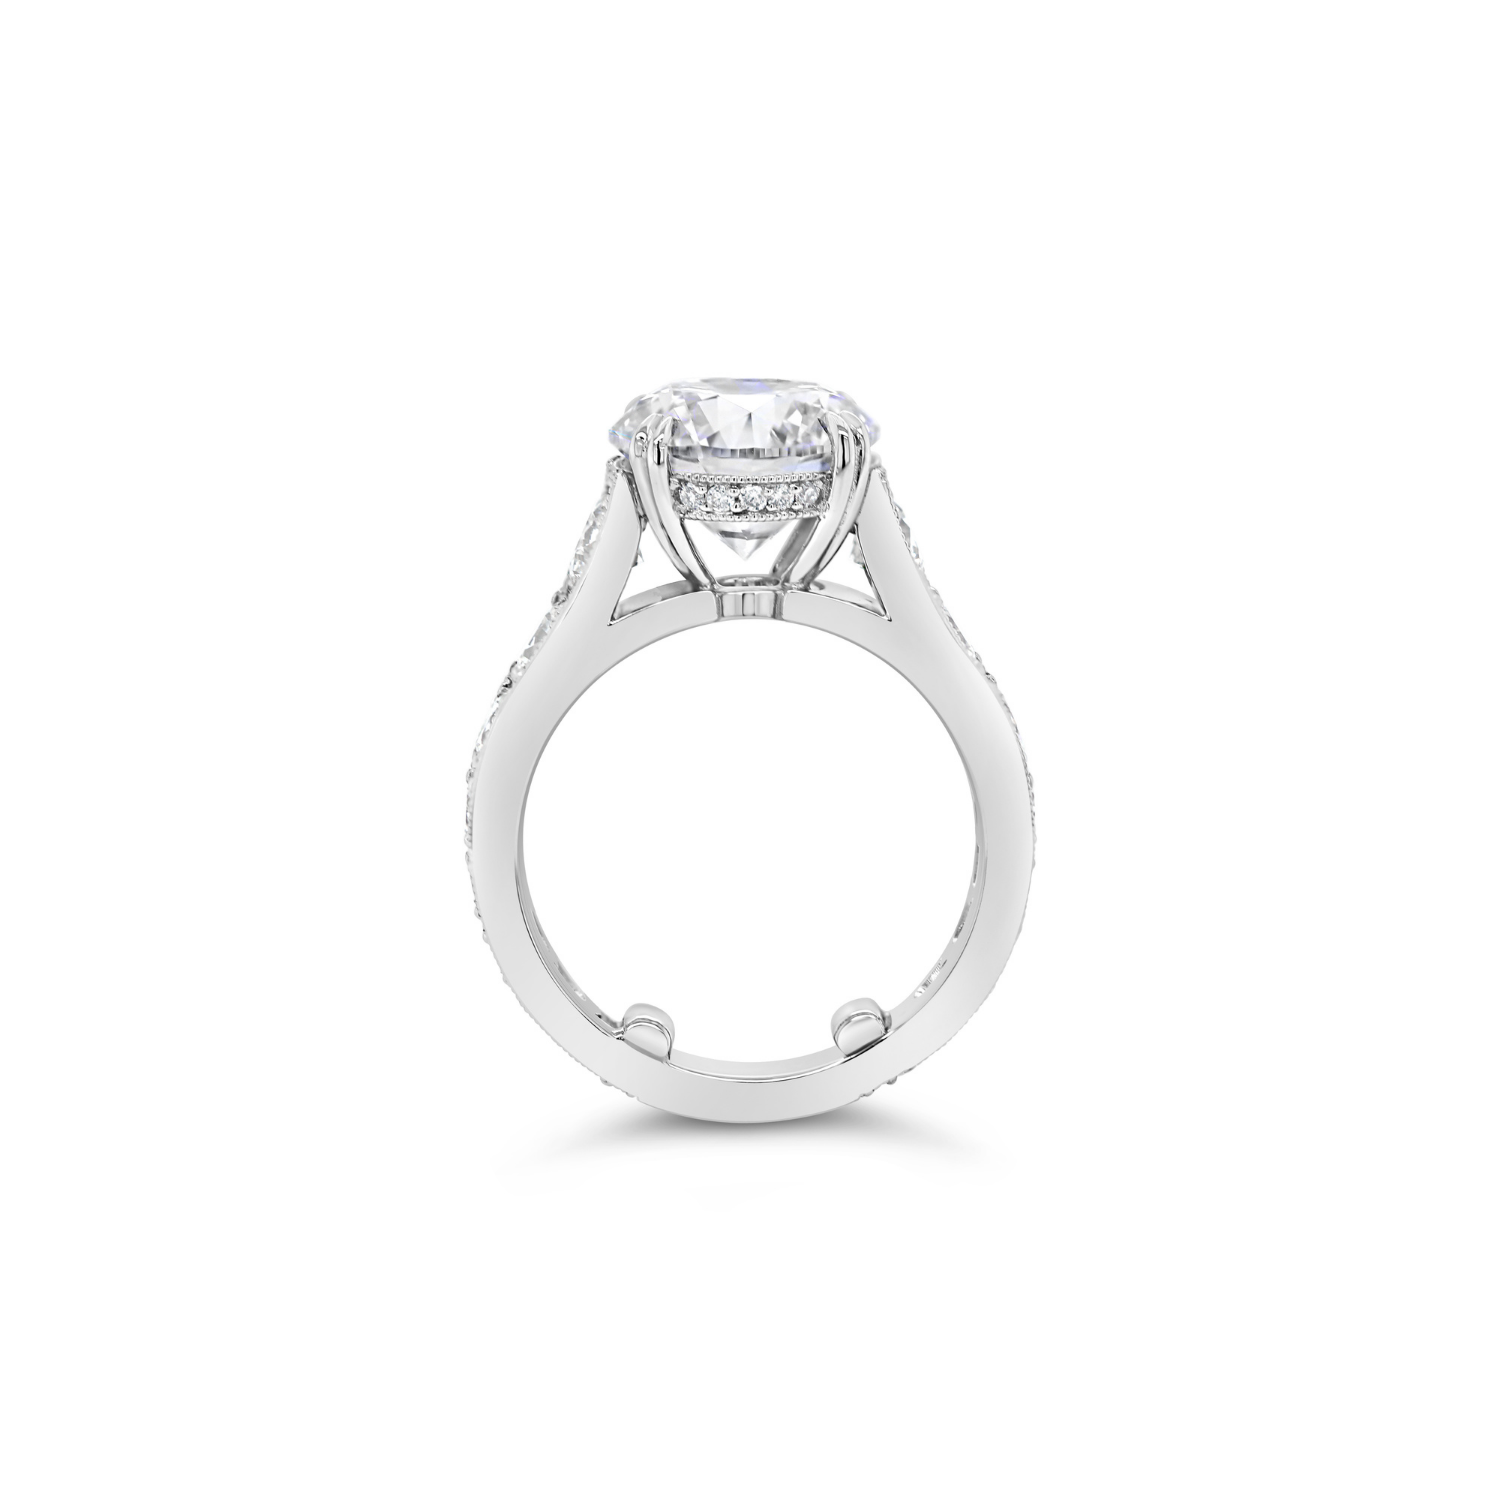 Round Brilliant Cut Diamond & Tapered Band Engagement Ring white gold